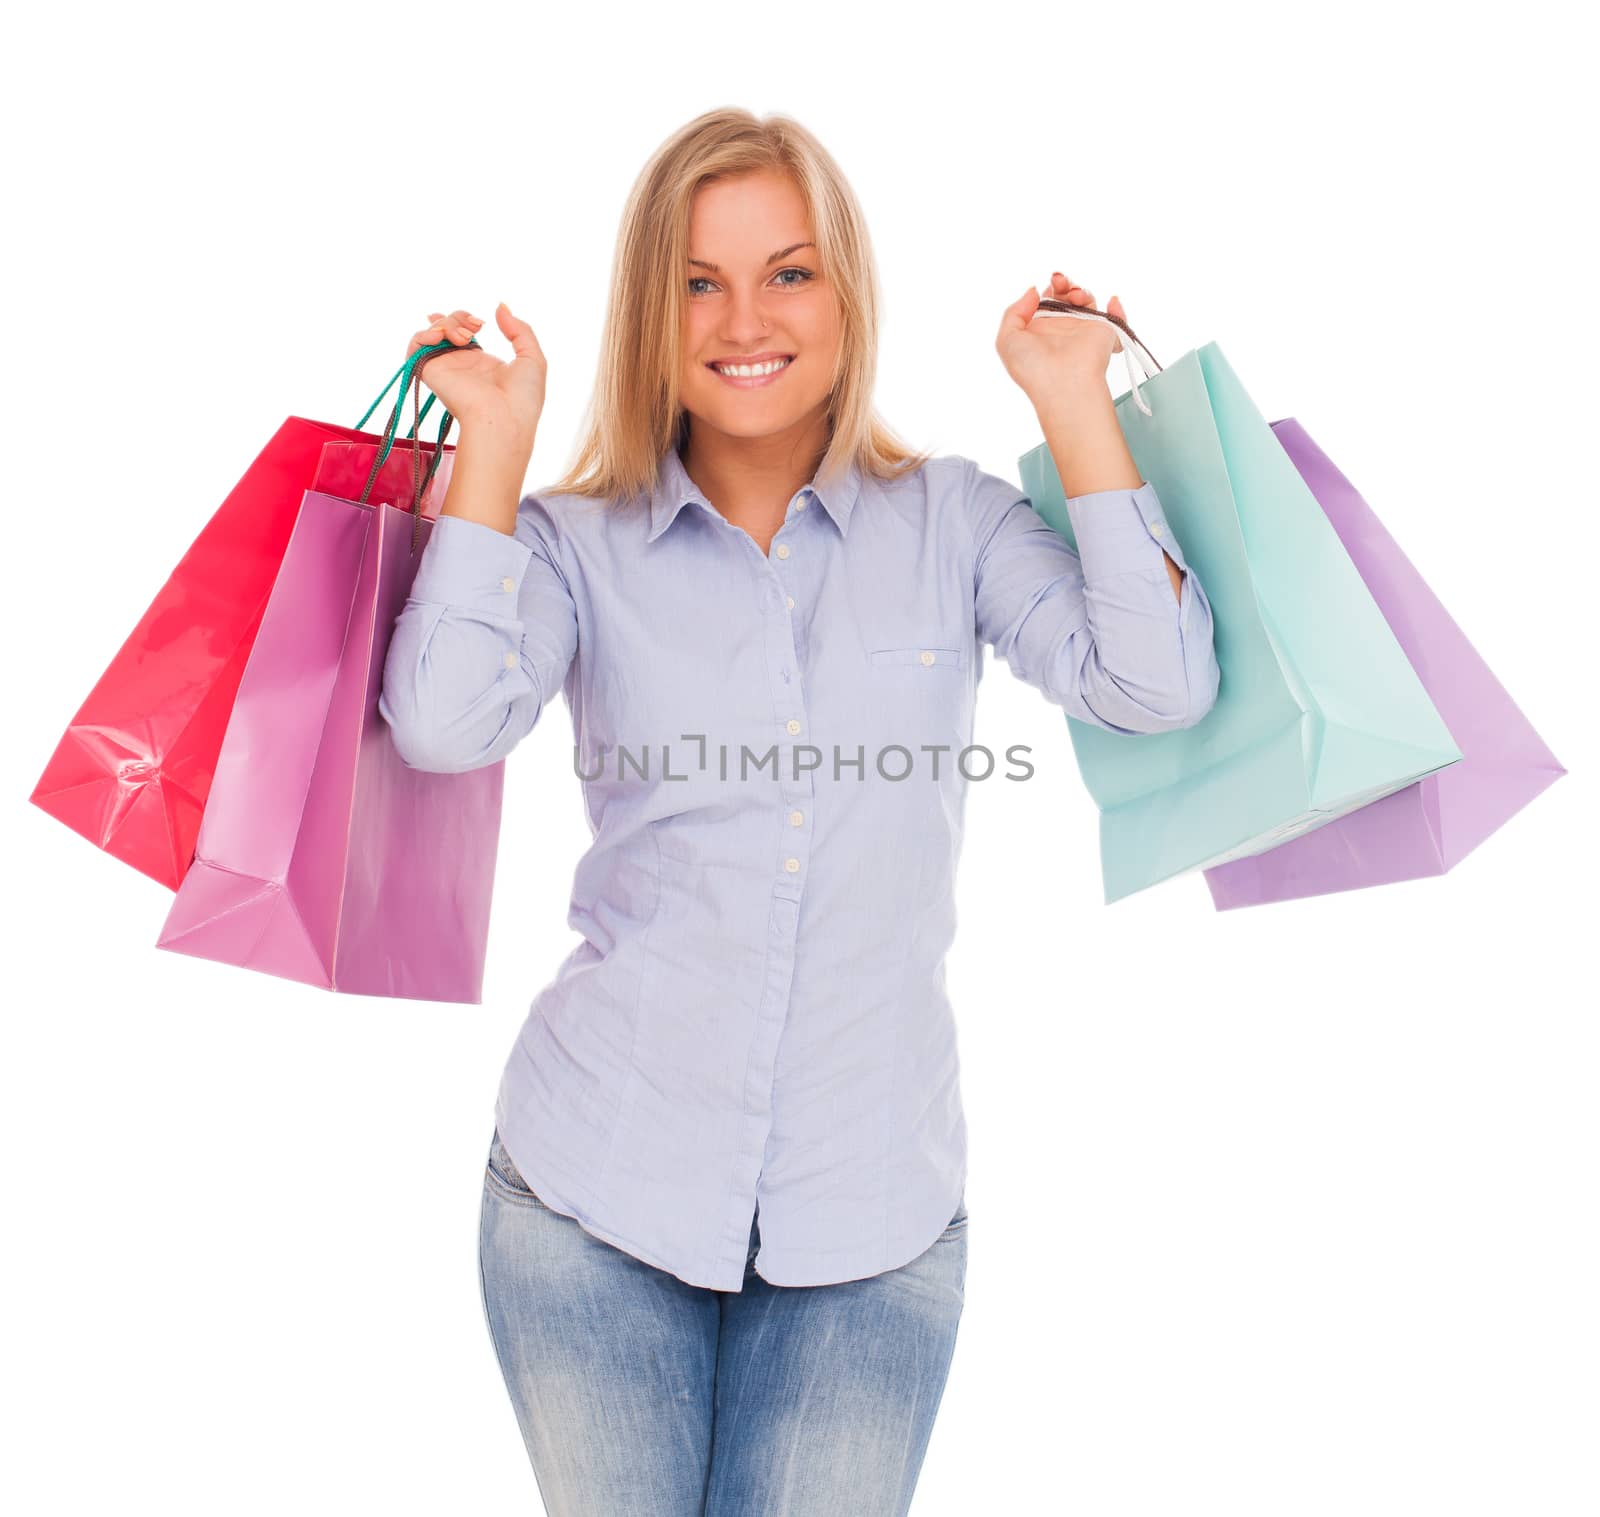 Young blond caucasian woman with shopping bags smiling over white background